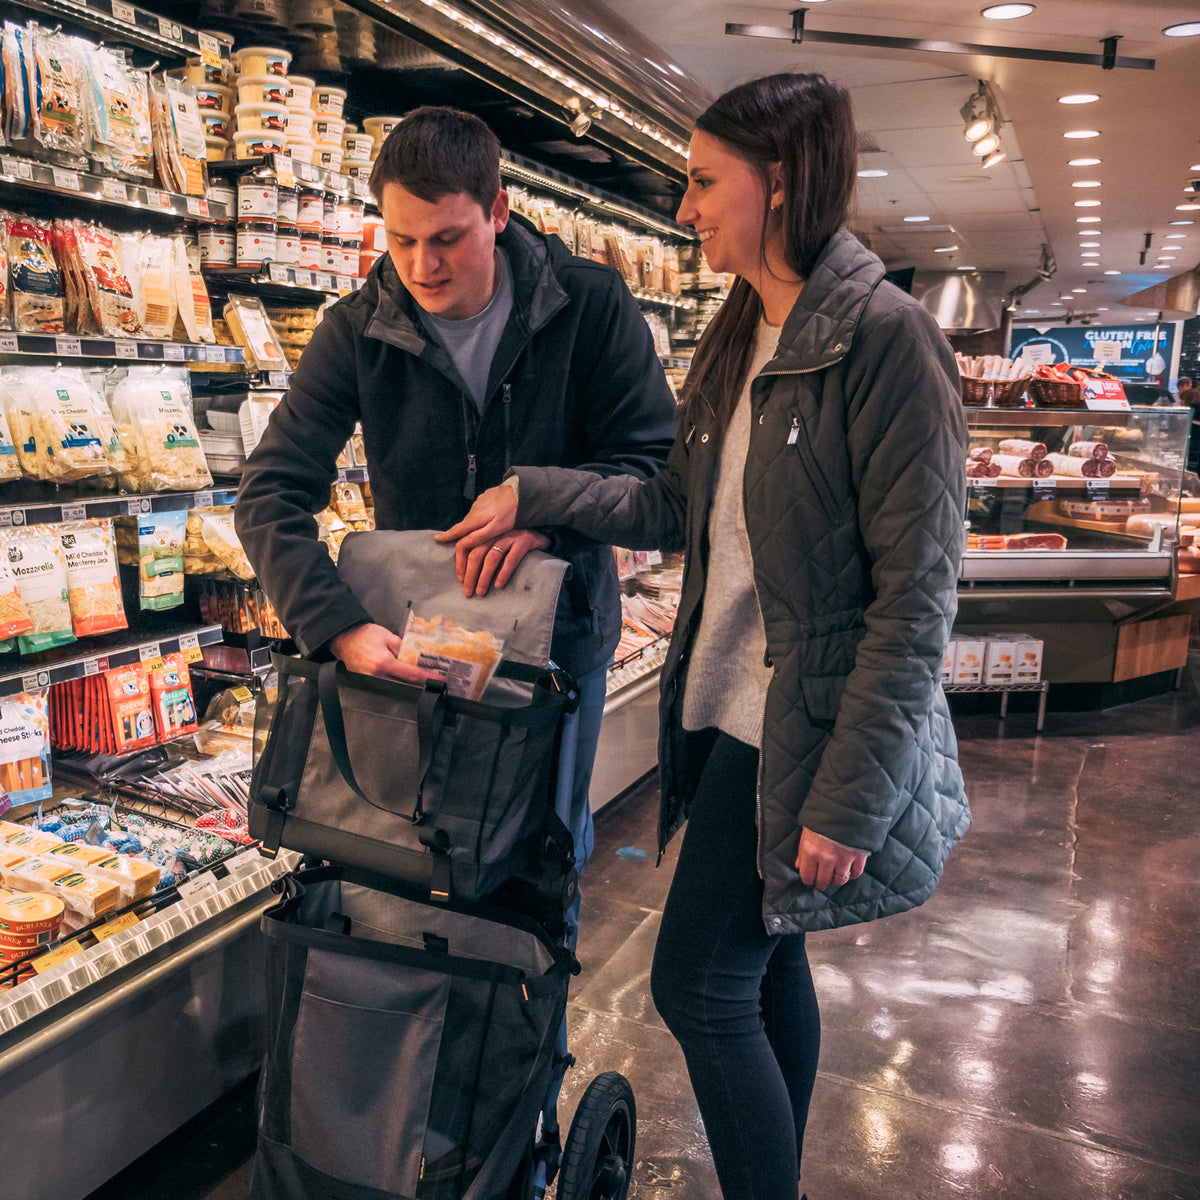 Burley Lower Market Bags on Travoy in Grocery Store